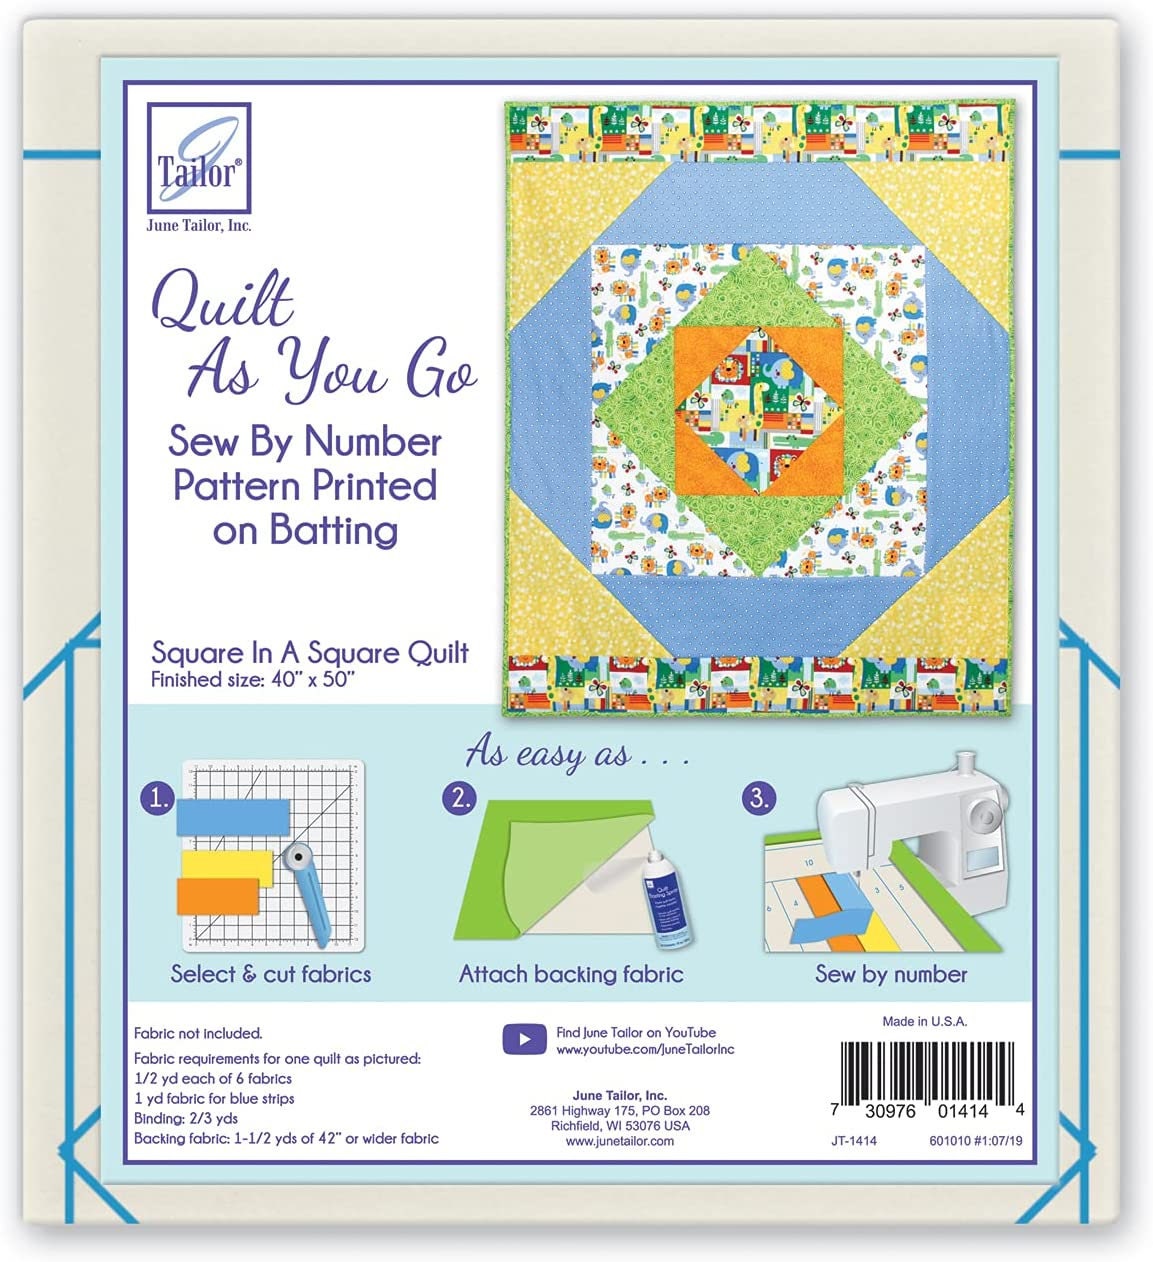 Sew by Number Pattern Printed BATTING Quilt as You Go Square in a Square  From June Tailor Finished Size Approx 40x50 